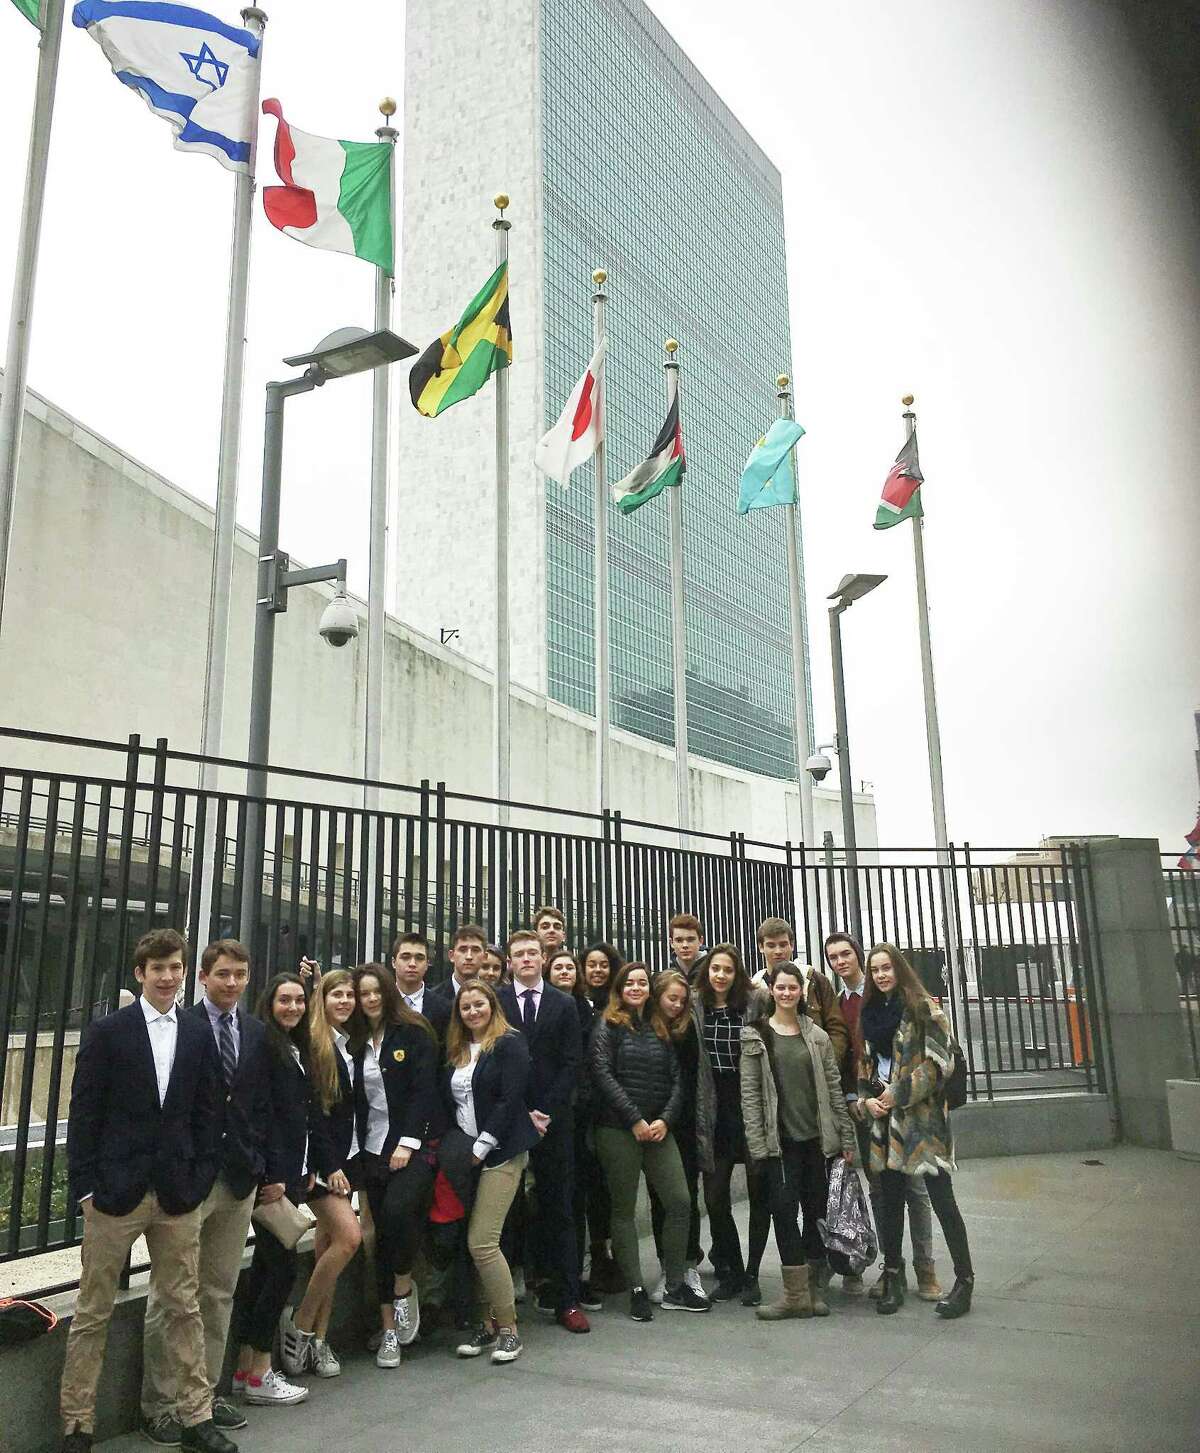 Greenwich residents Lauren Zide, a freshman at King School, and Brittnay Lombardi, a senior at King School, were among the group of students from the Global Studies program that participated in the Global Classroom program at the United Nations in late February. The group, all members of the Global Studies program at King, also included 10 visiting French exchange students who had spent two weeks at King. This is the third time that King Global Ed program will be working with the International Cinema Education organization, an NGO established in March 2003 at the United Nations.